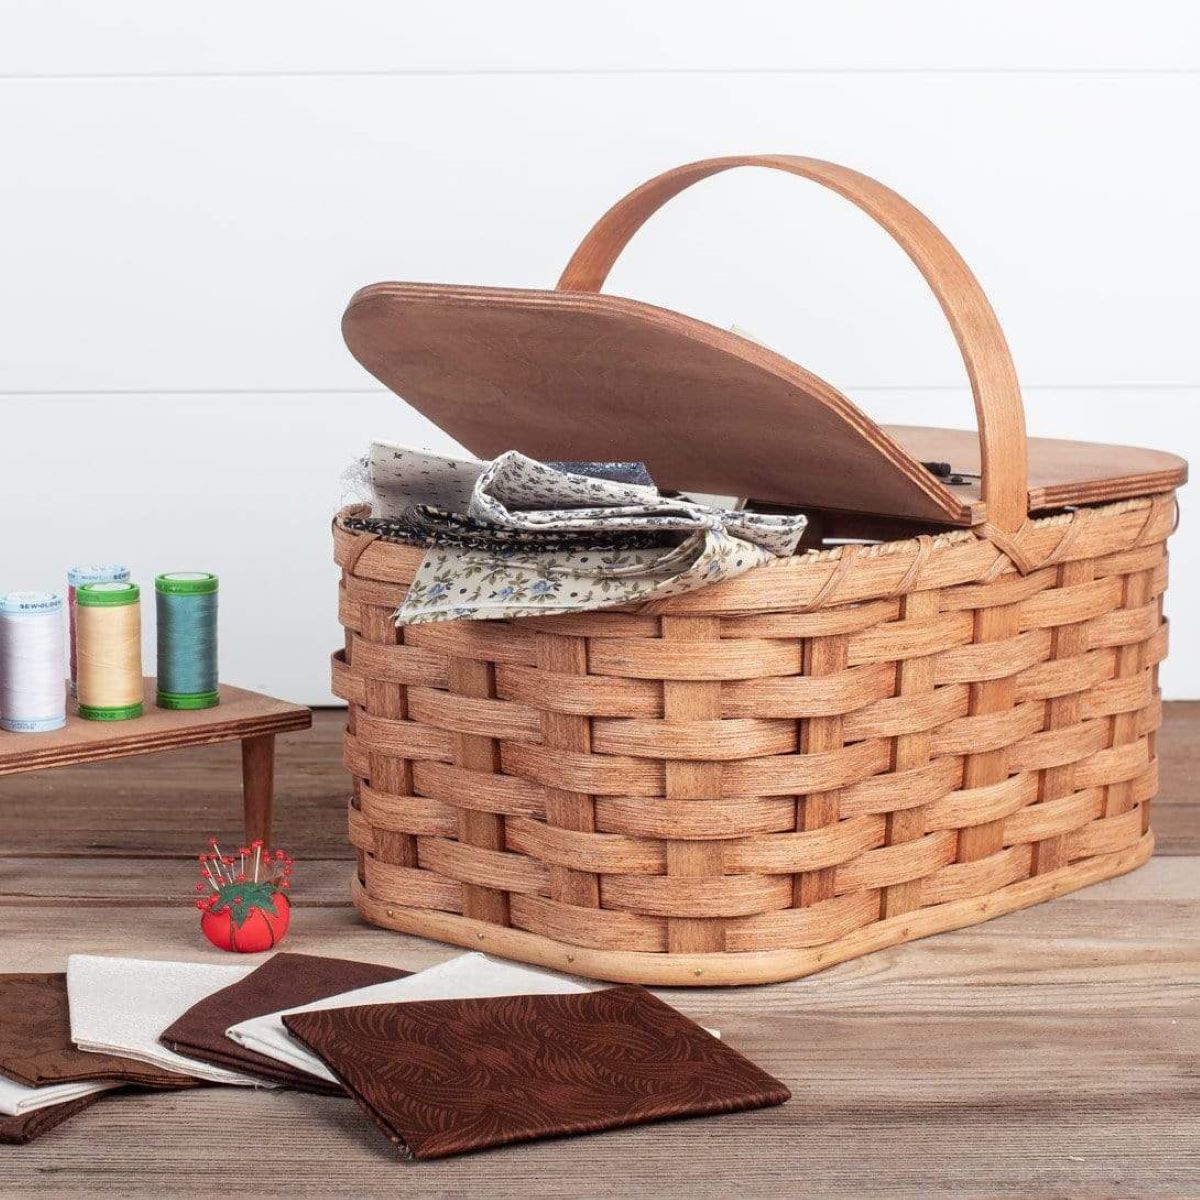 14 Unbelievable Sewing Boxes And Baskets for 2023